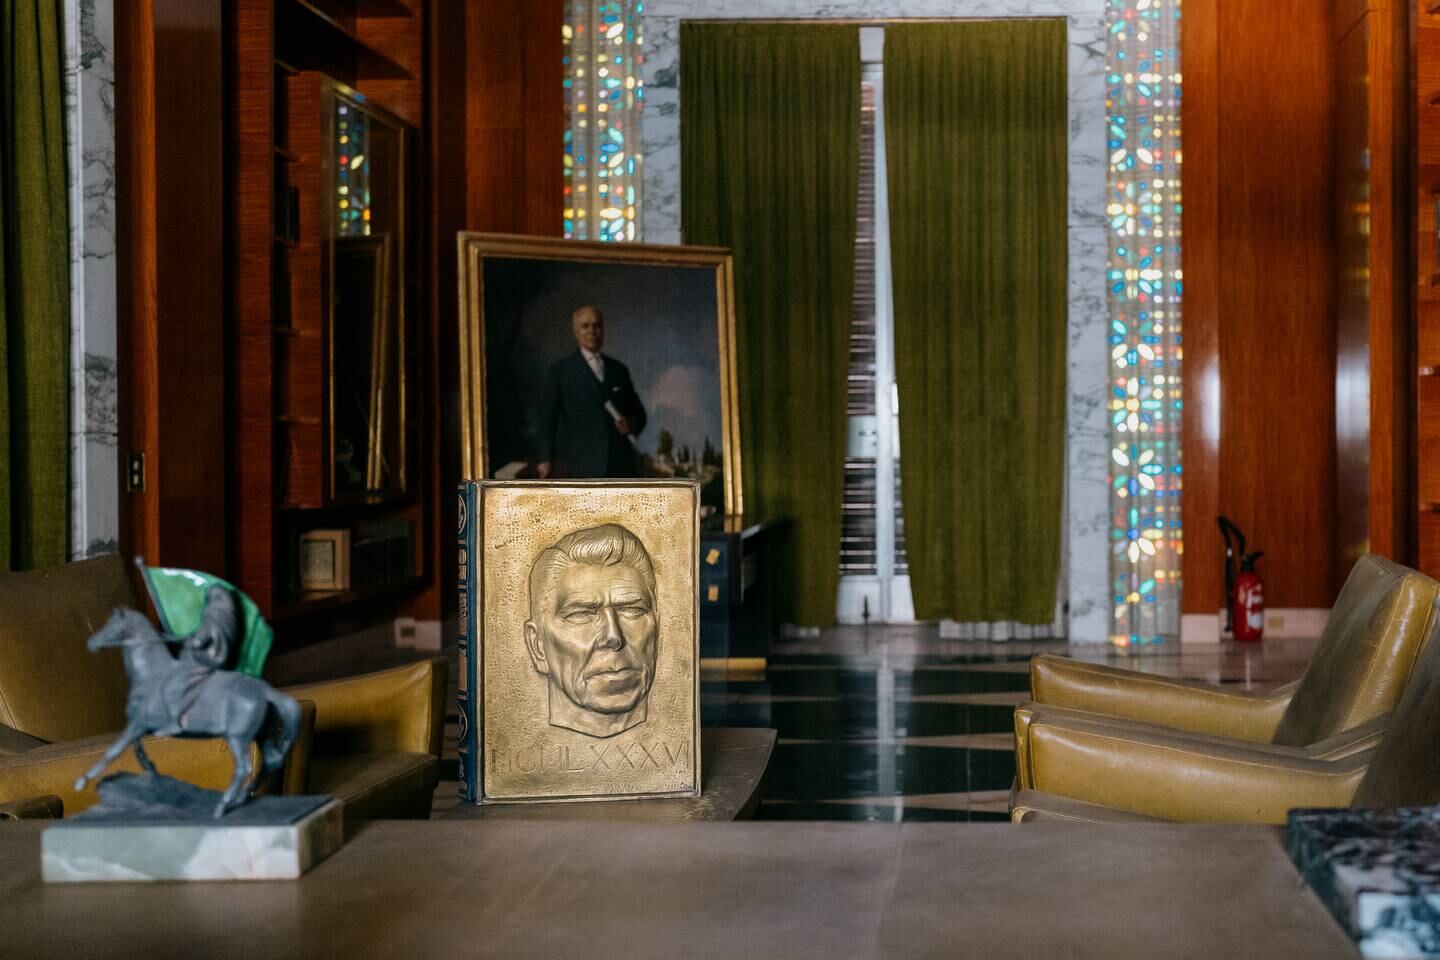 Among the many gifts and possessions on display at the museum is a copy of Ronald Regan's biography, with an haut-relief bronze of the president on its cover. Erin Clare Brown / The National